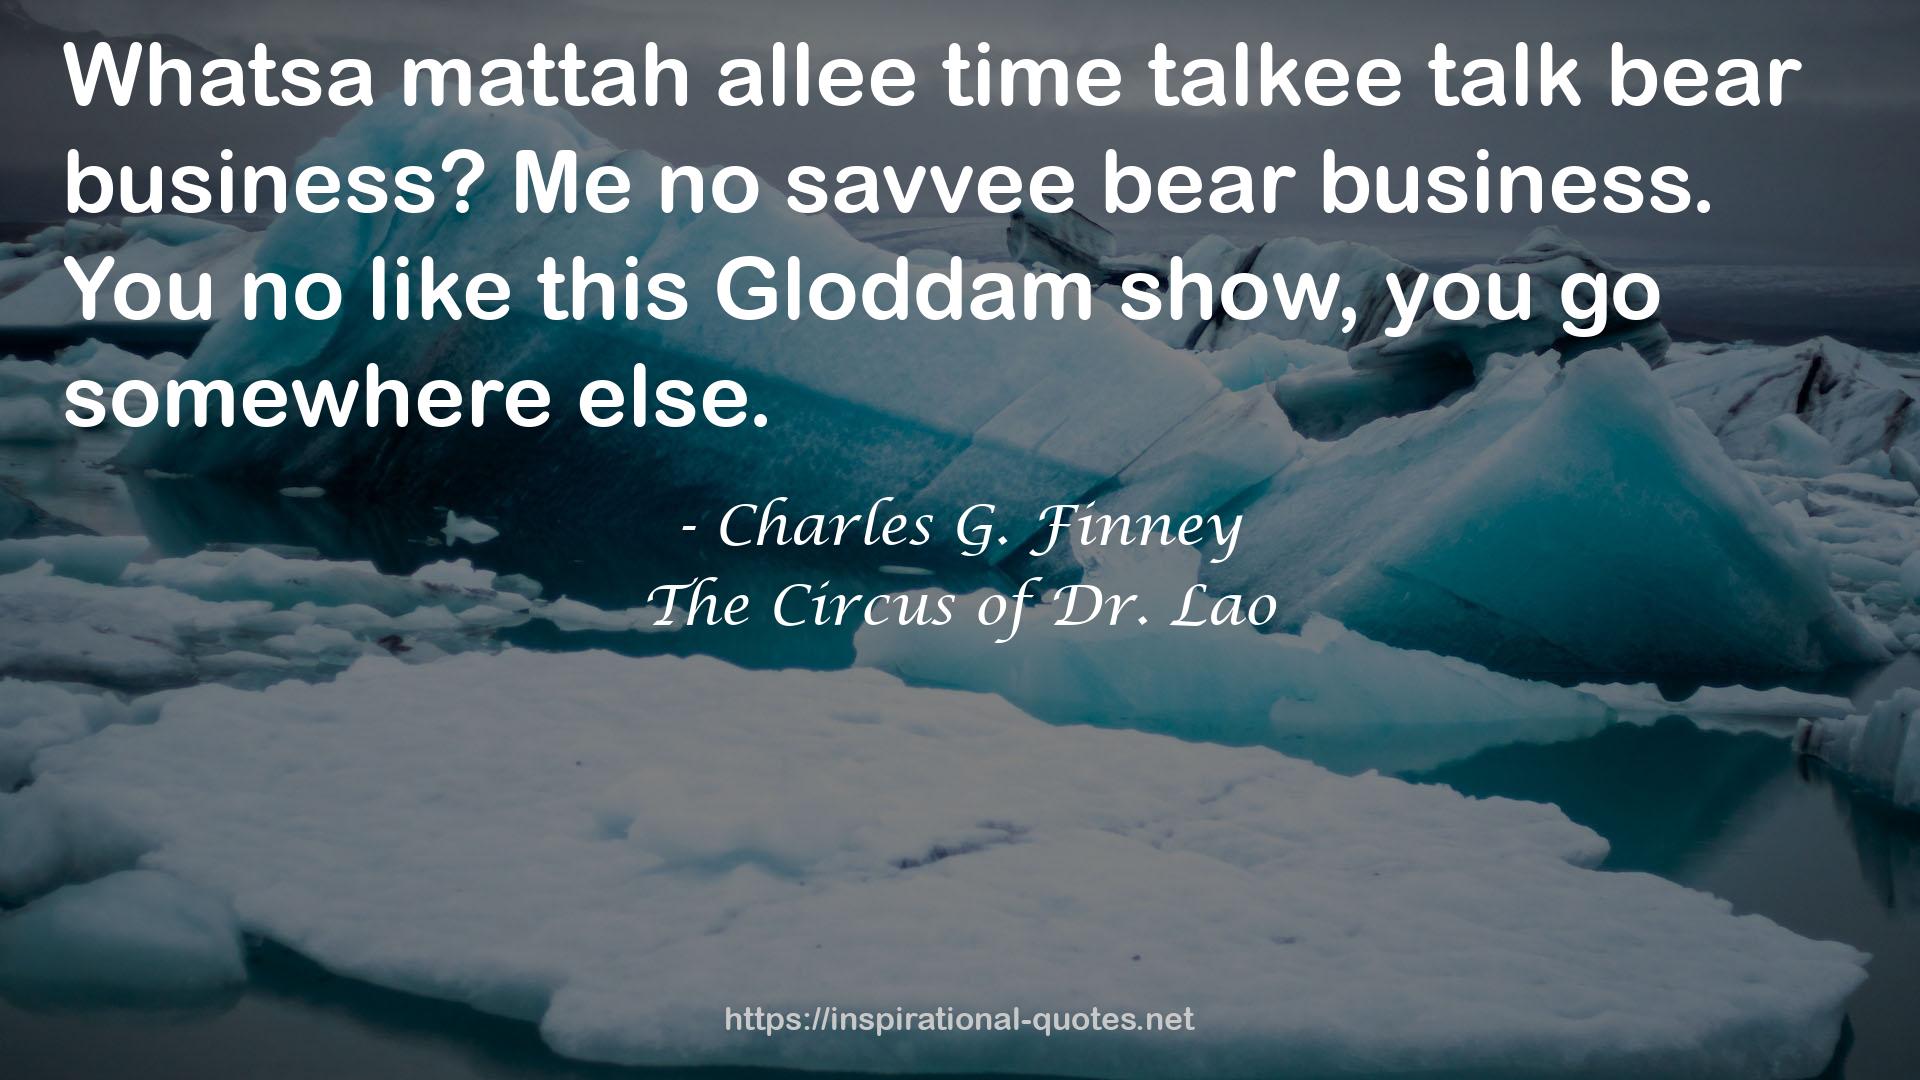 Charles G. Finney QUOTES